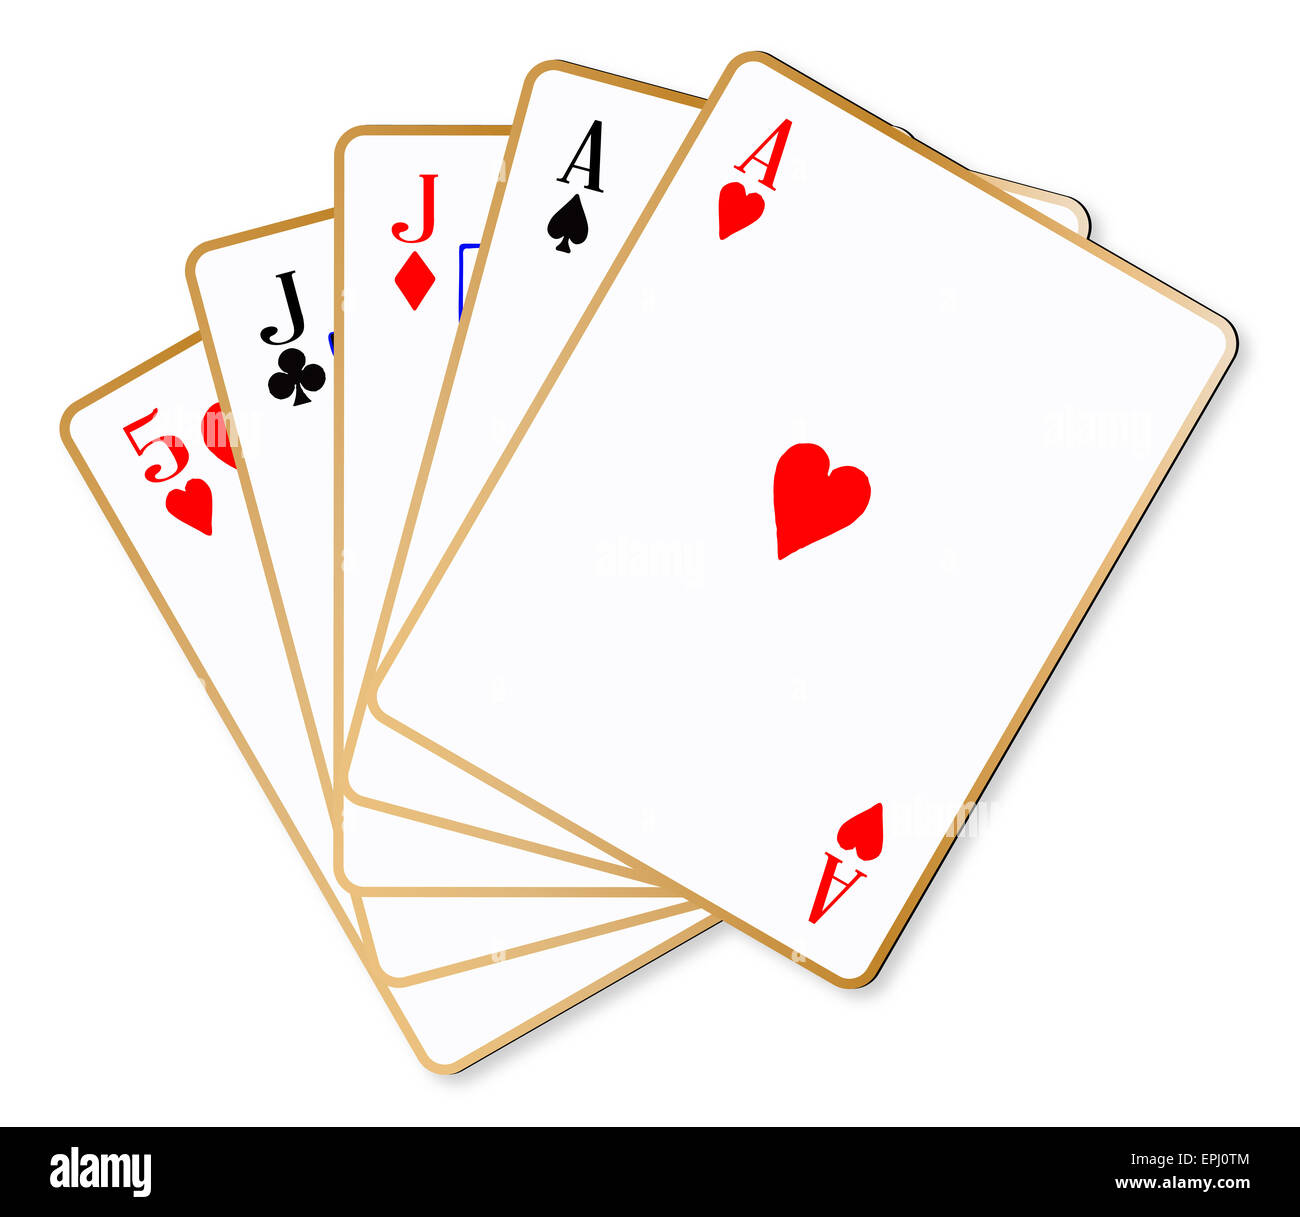 The poker hand two pair over a white background Stock Photo